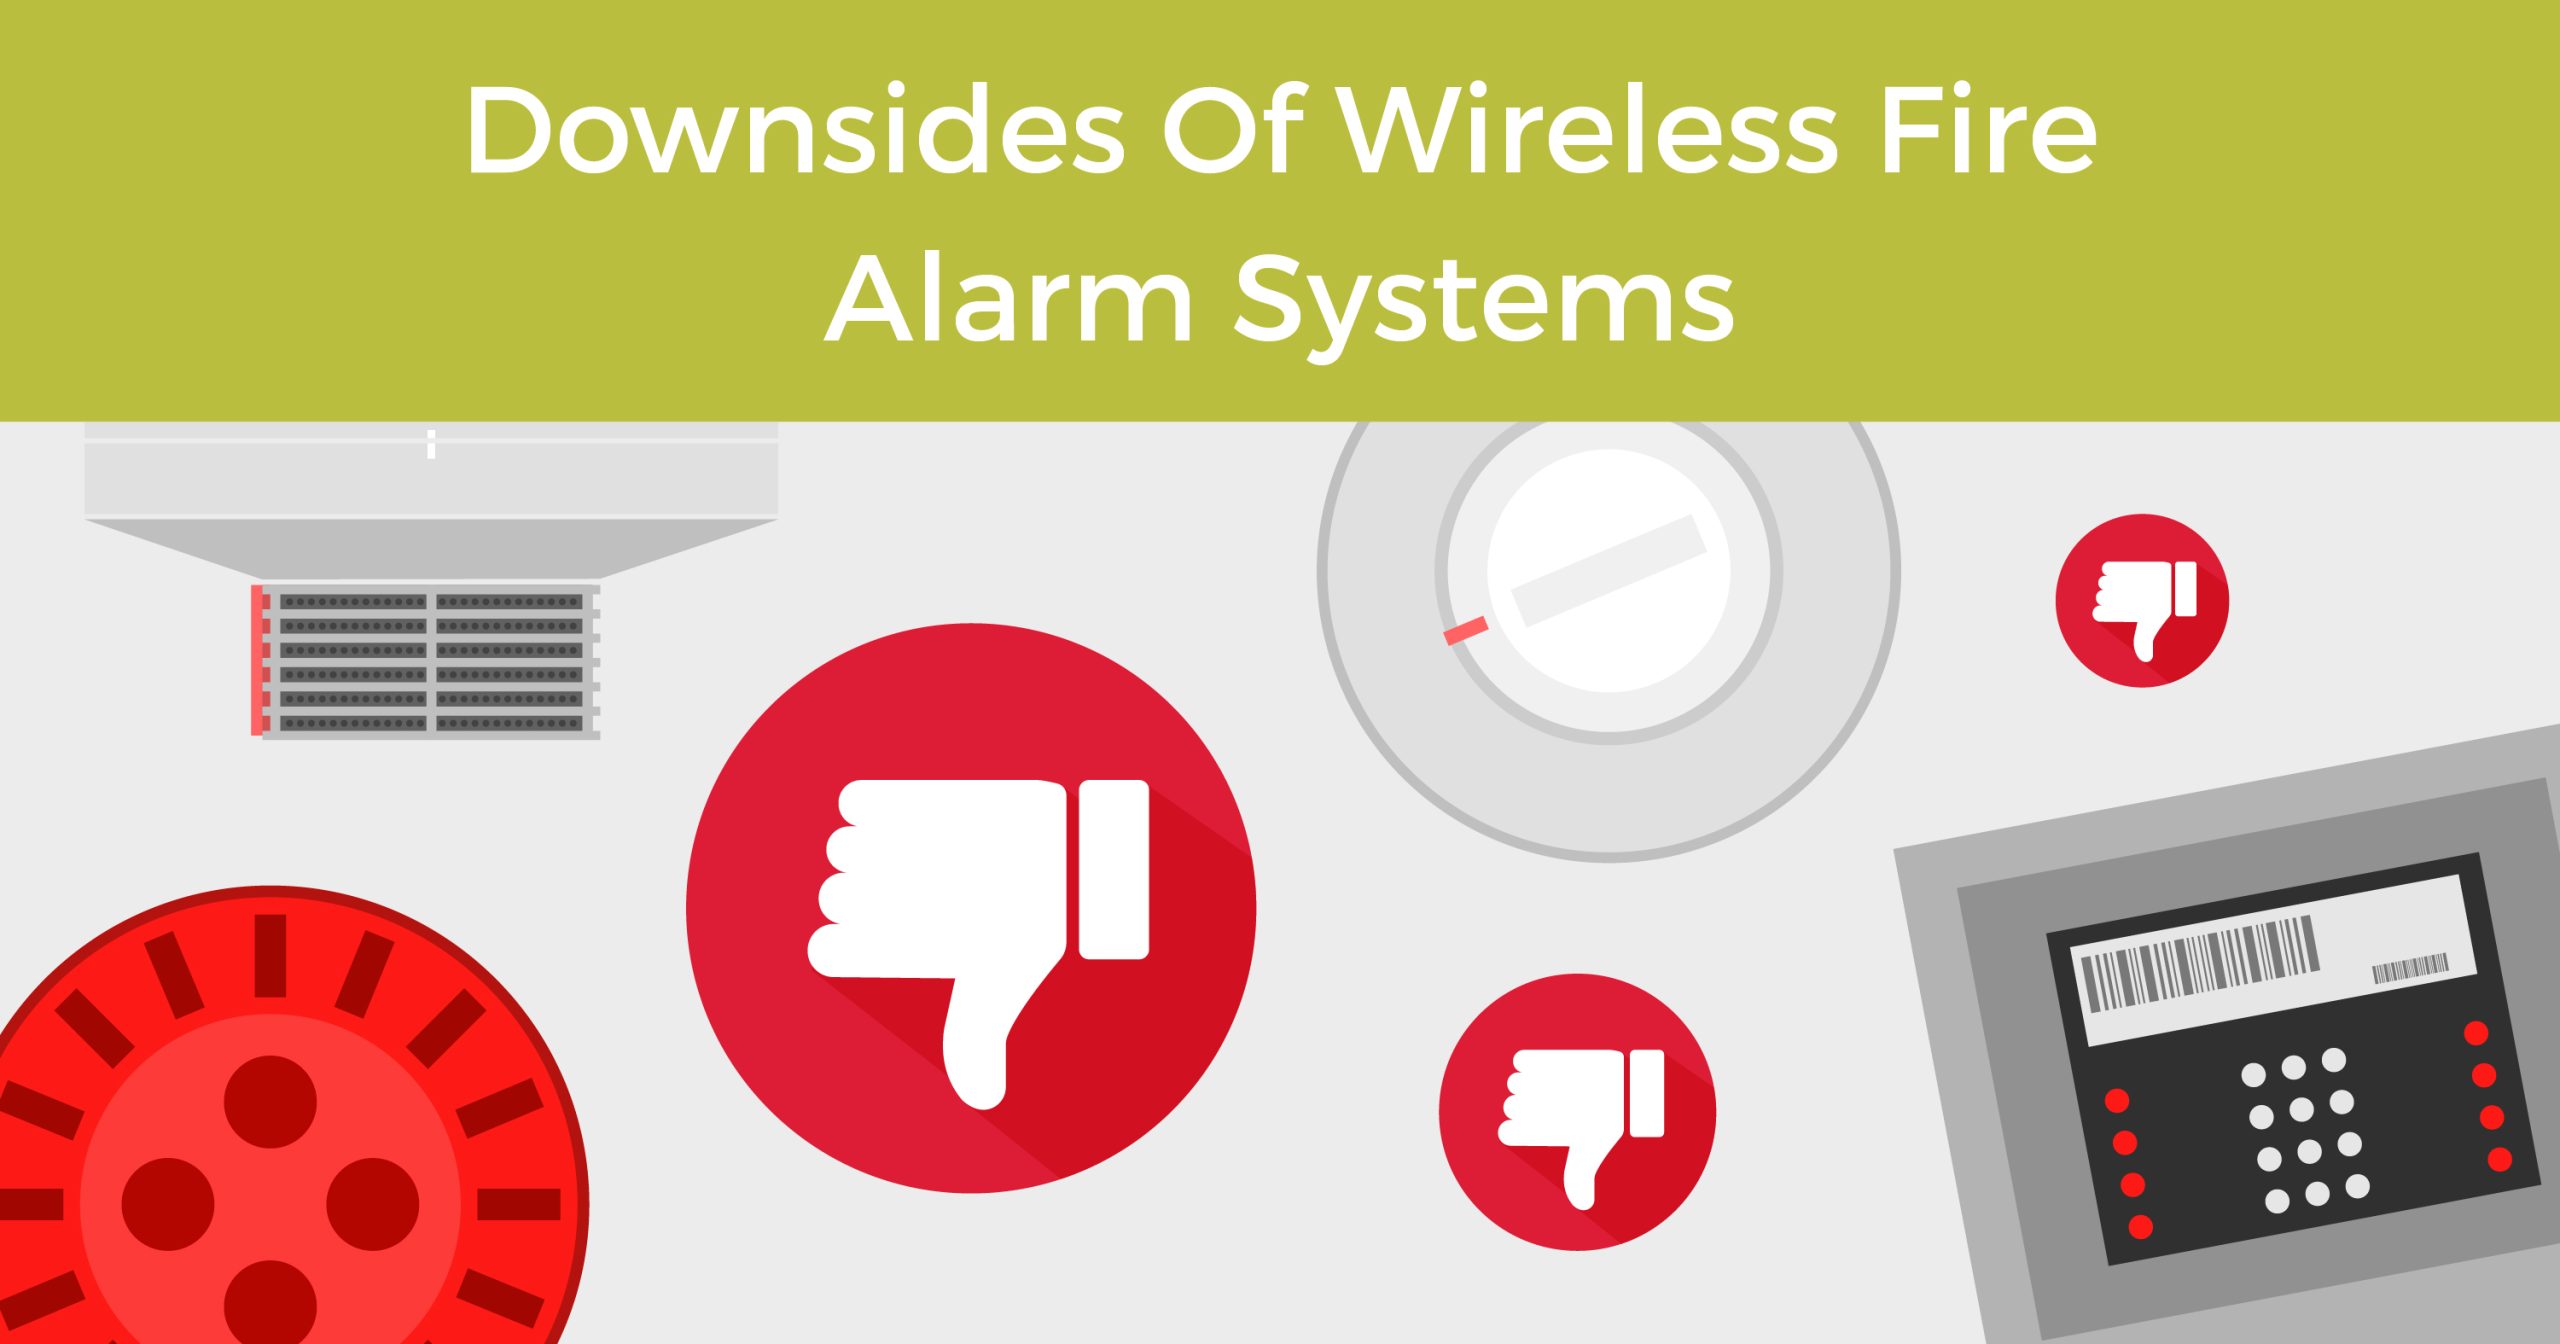 Downsides of wireless fire alarm systems